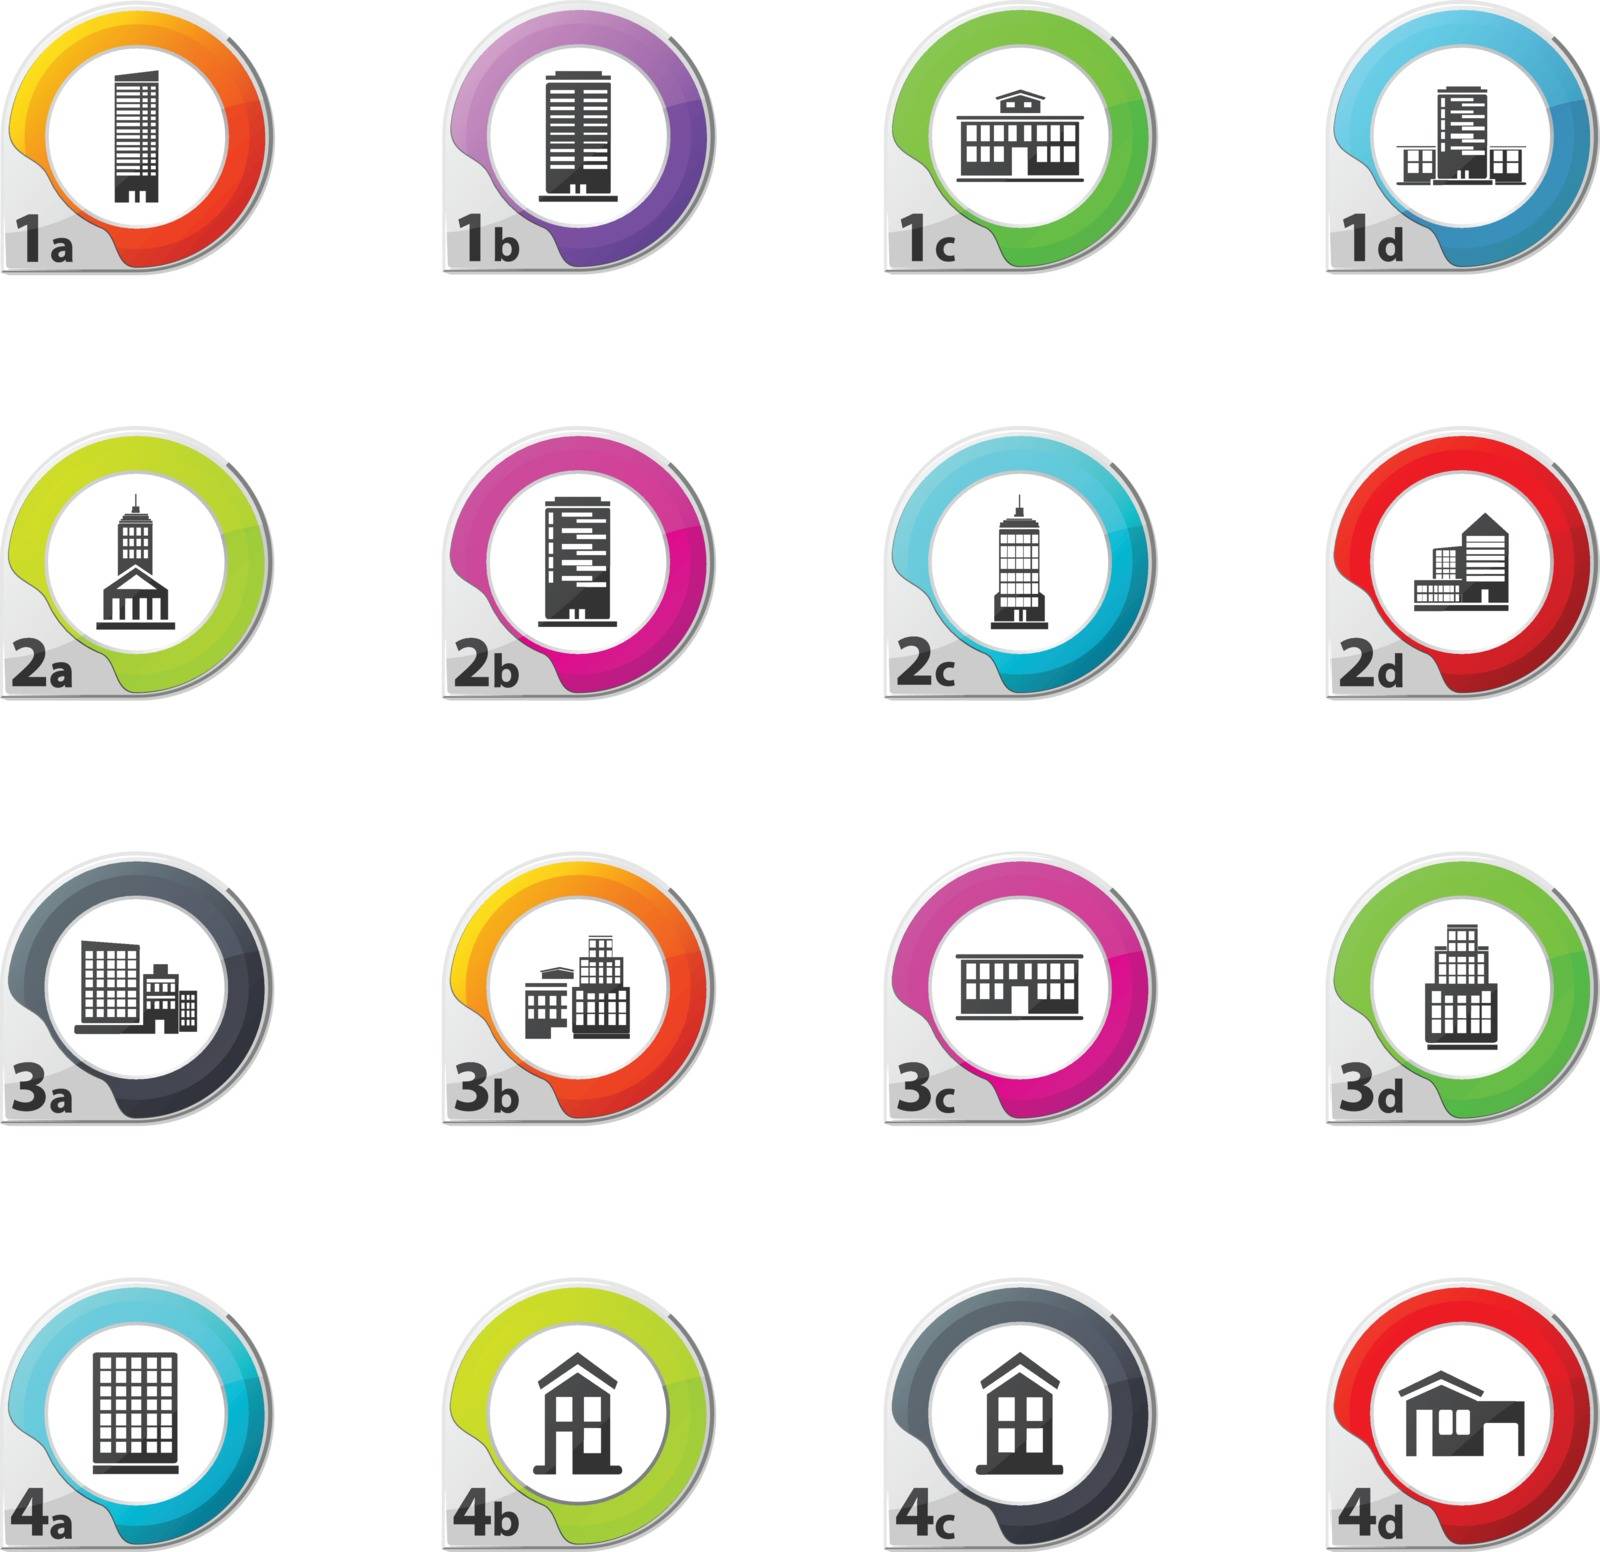 Buildings icons set by ayax